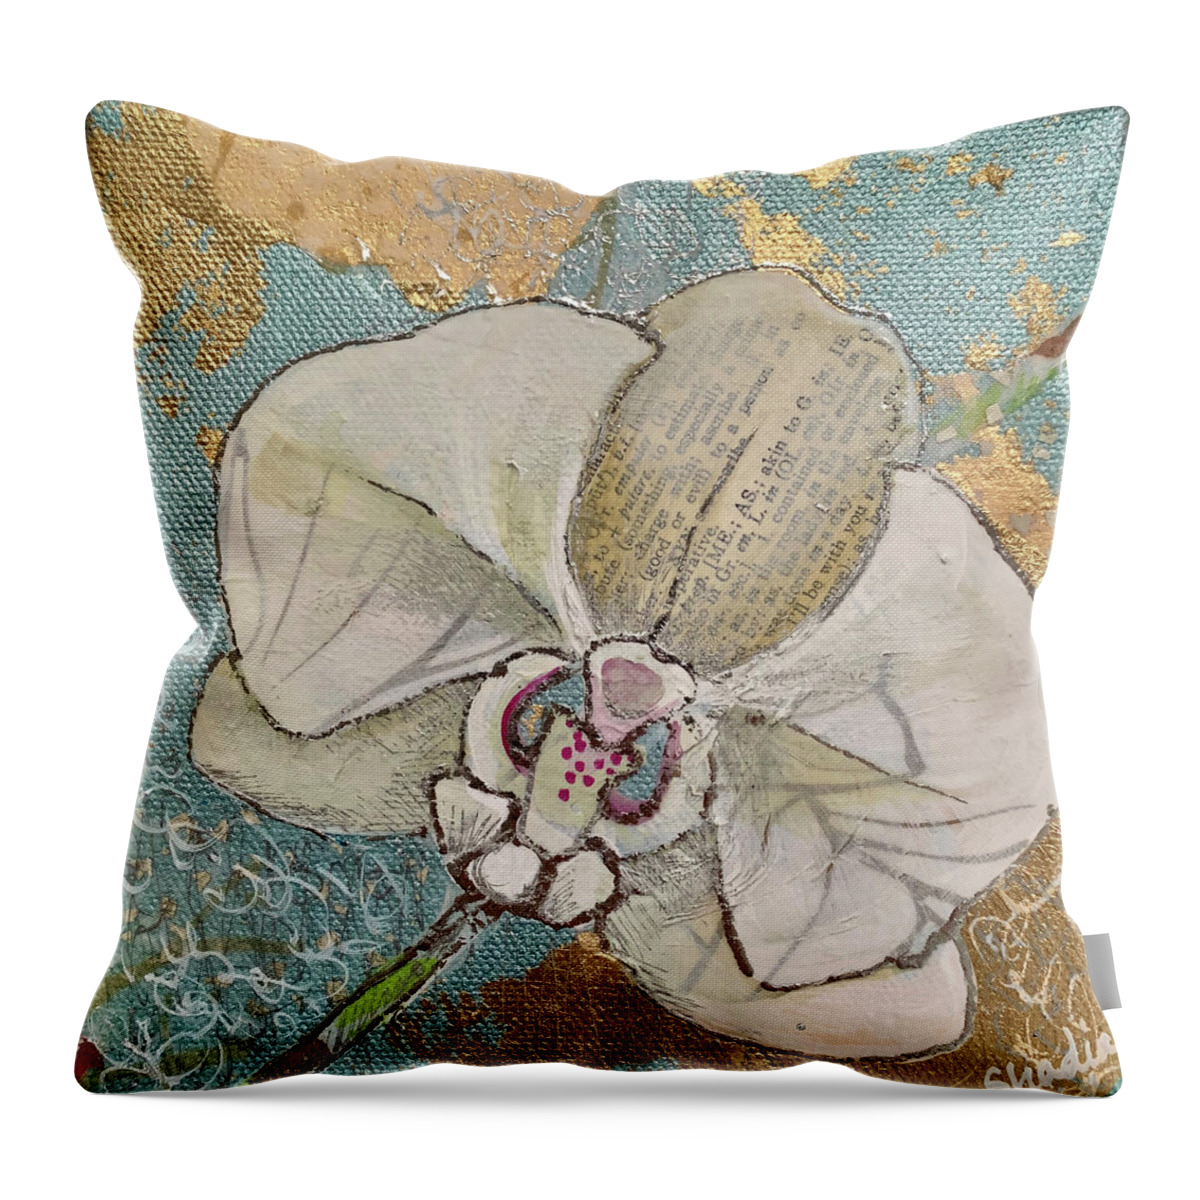 Orchid White Orchids Flowers Blossom Tropical Tropics Love Beauty Whitish Soft Delicate Green Fragile Fertility Refinement Thoughtfulness Charm Phalaenopsis Reverence Gold Gold Leaf Metallic Elegance Elegant Graceful Petite Dow Gardens Garden Midland Dowgarden Gold Collage Shadia Blue Pale Blue Soft Blue Throw Pillow featuring the painting Gilded Orchid I by Shadia Derbyshire